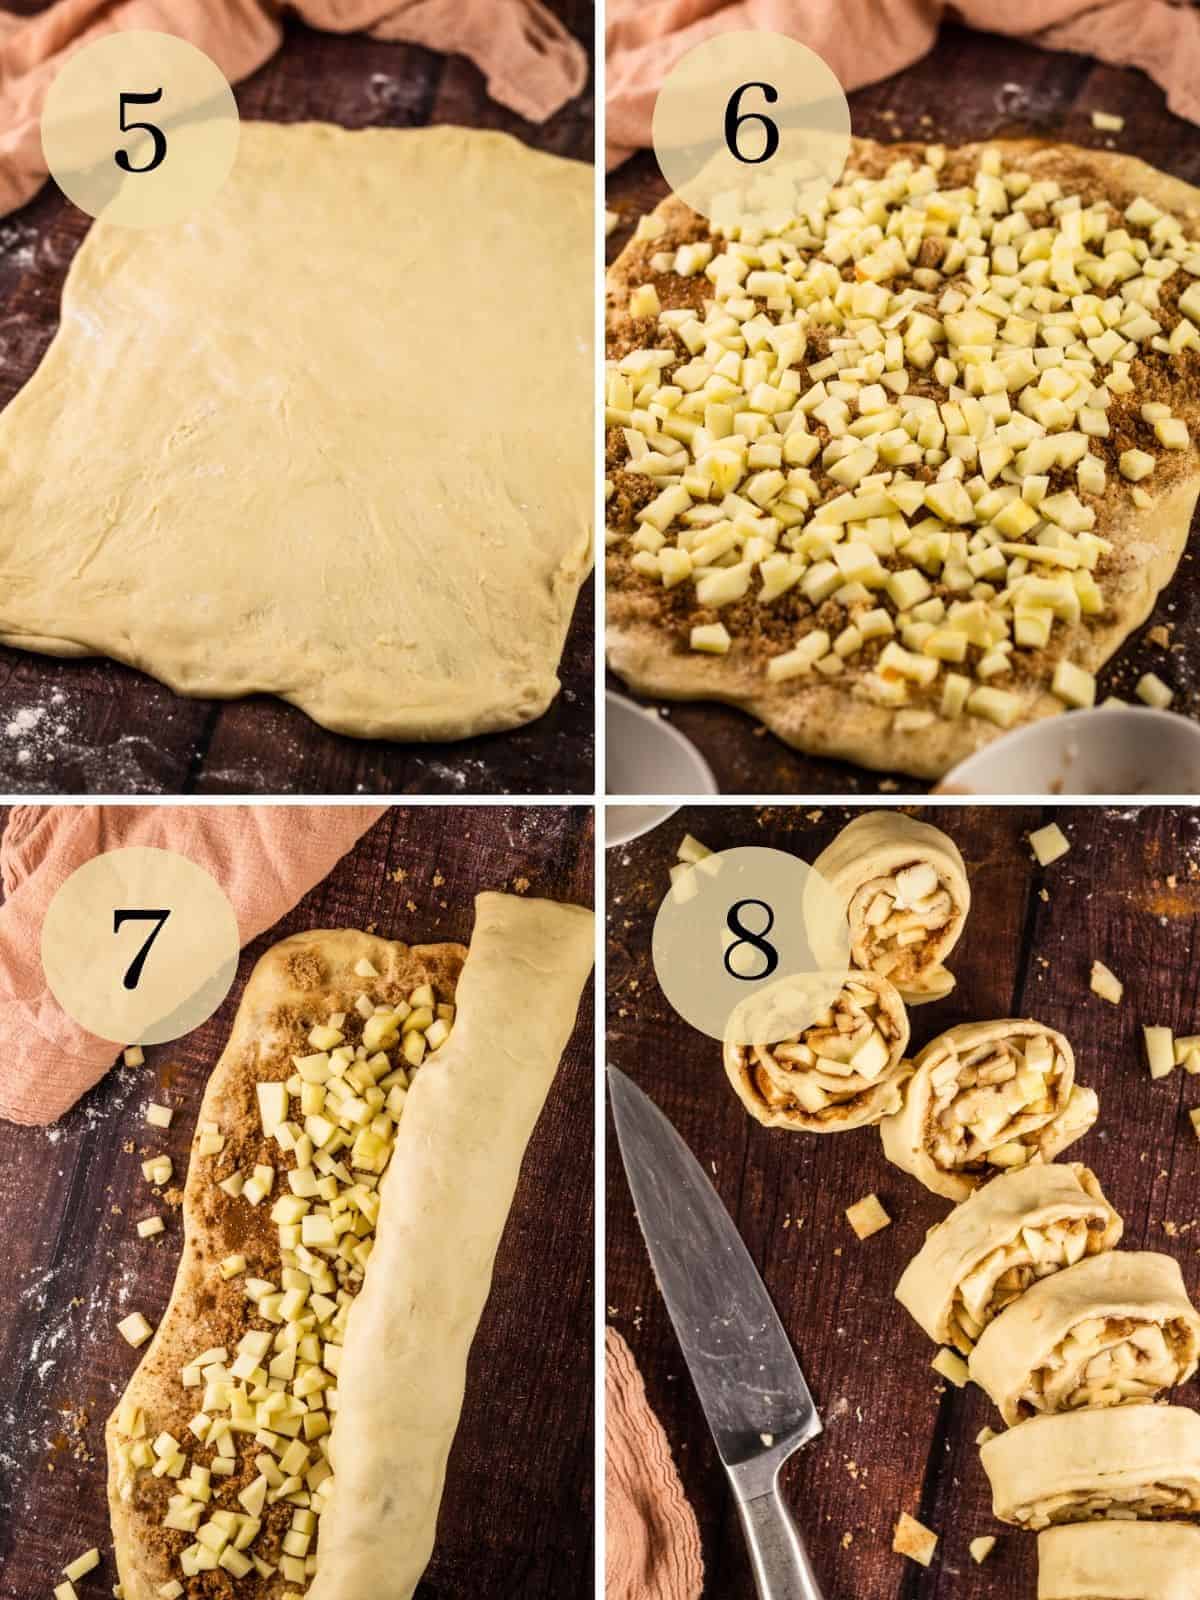 dough rolled and topped with apples, sugar and cinnamon, dough rolled up and cut into slices